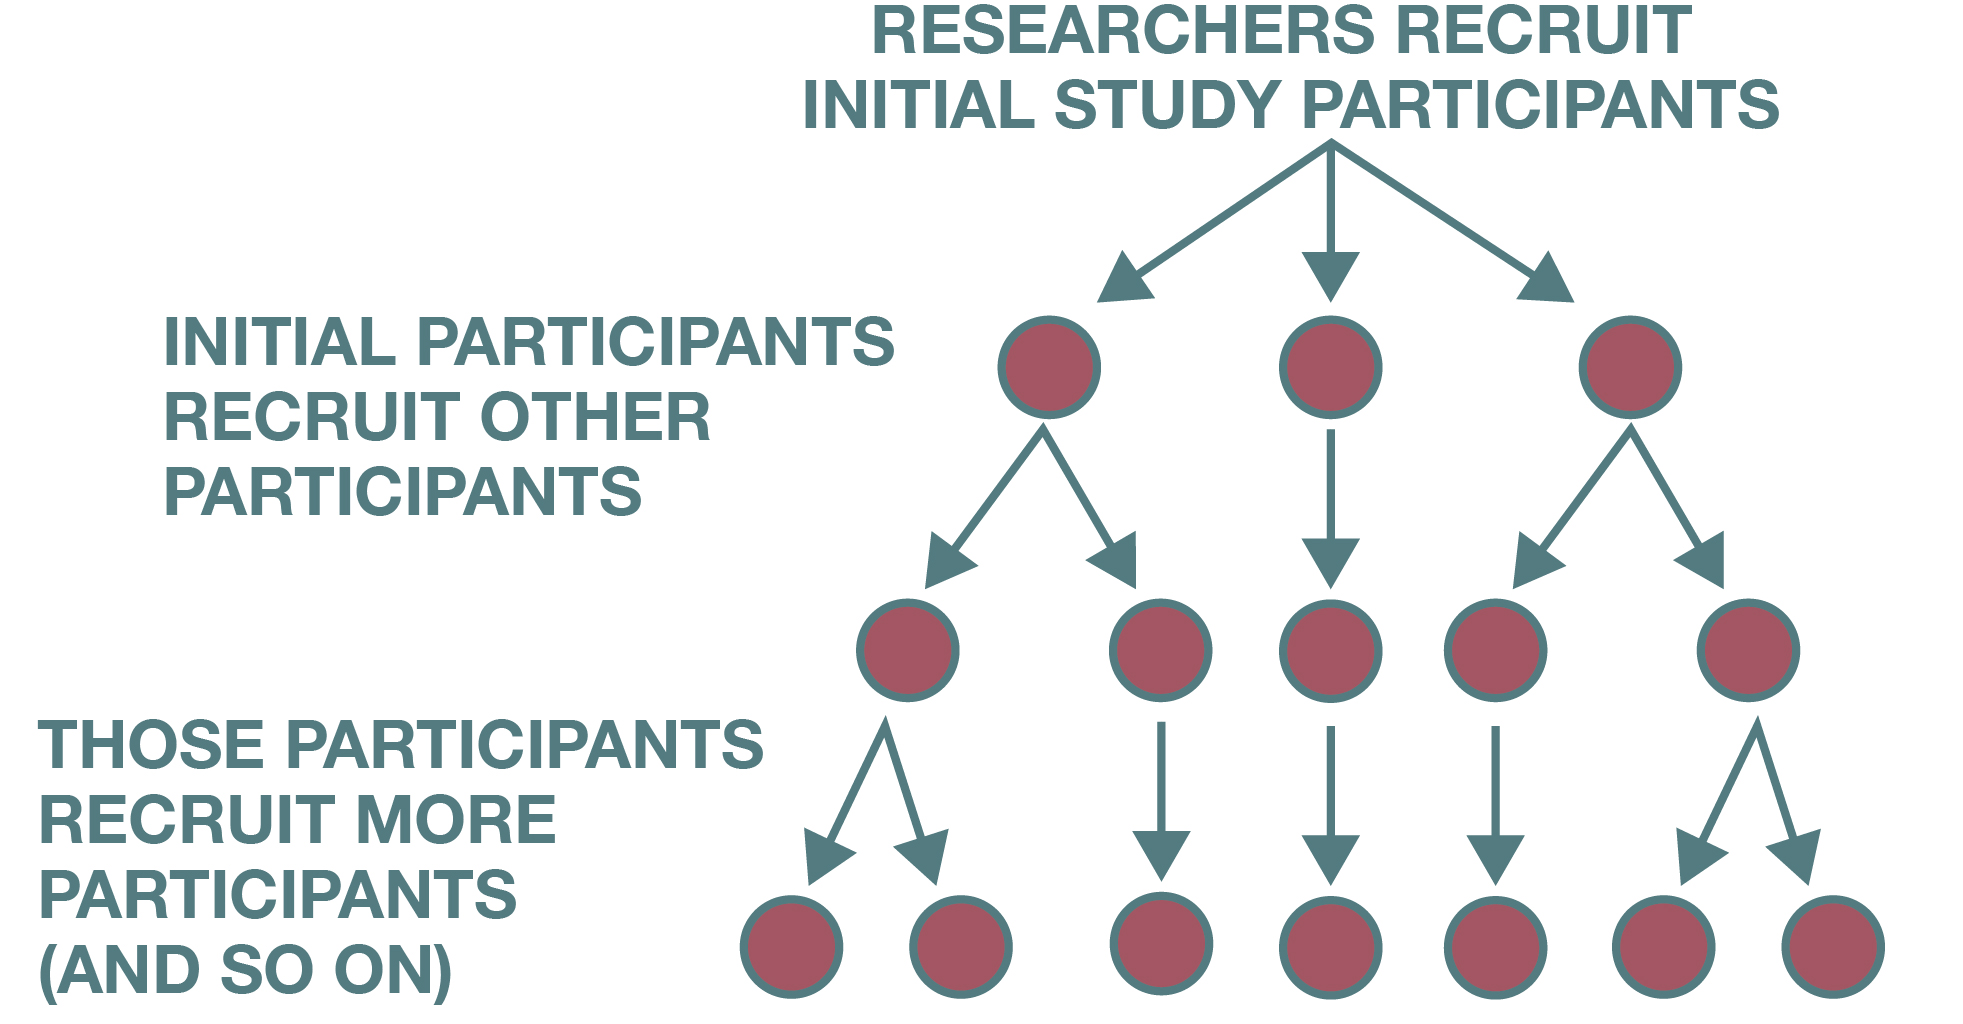 Diagram that illustrates the chain referrals that characterize snowball sampling.